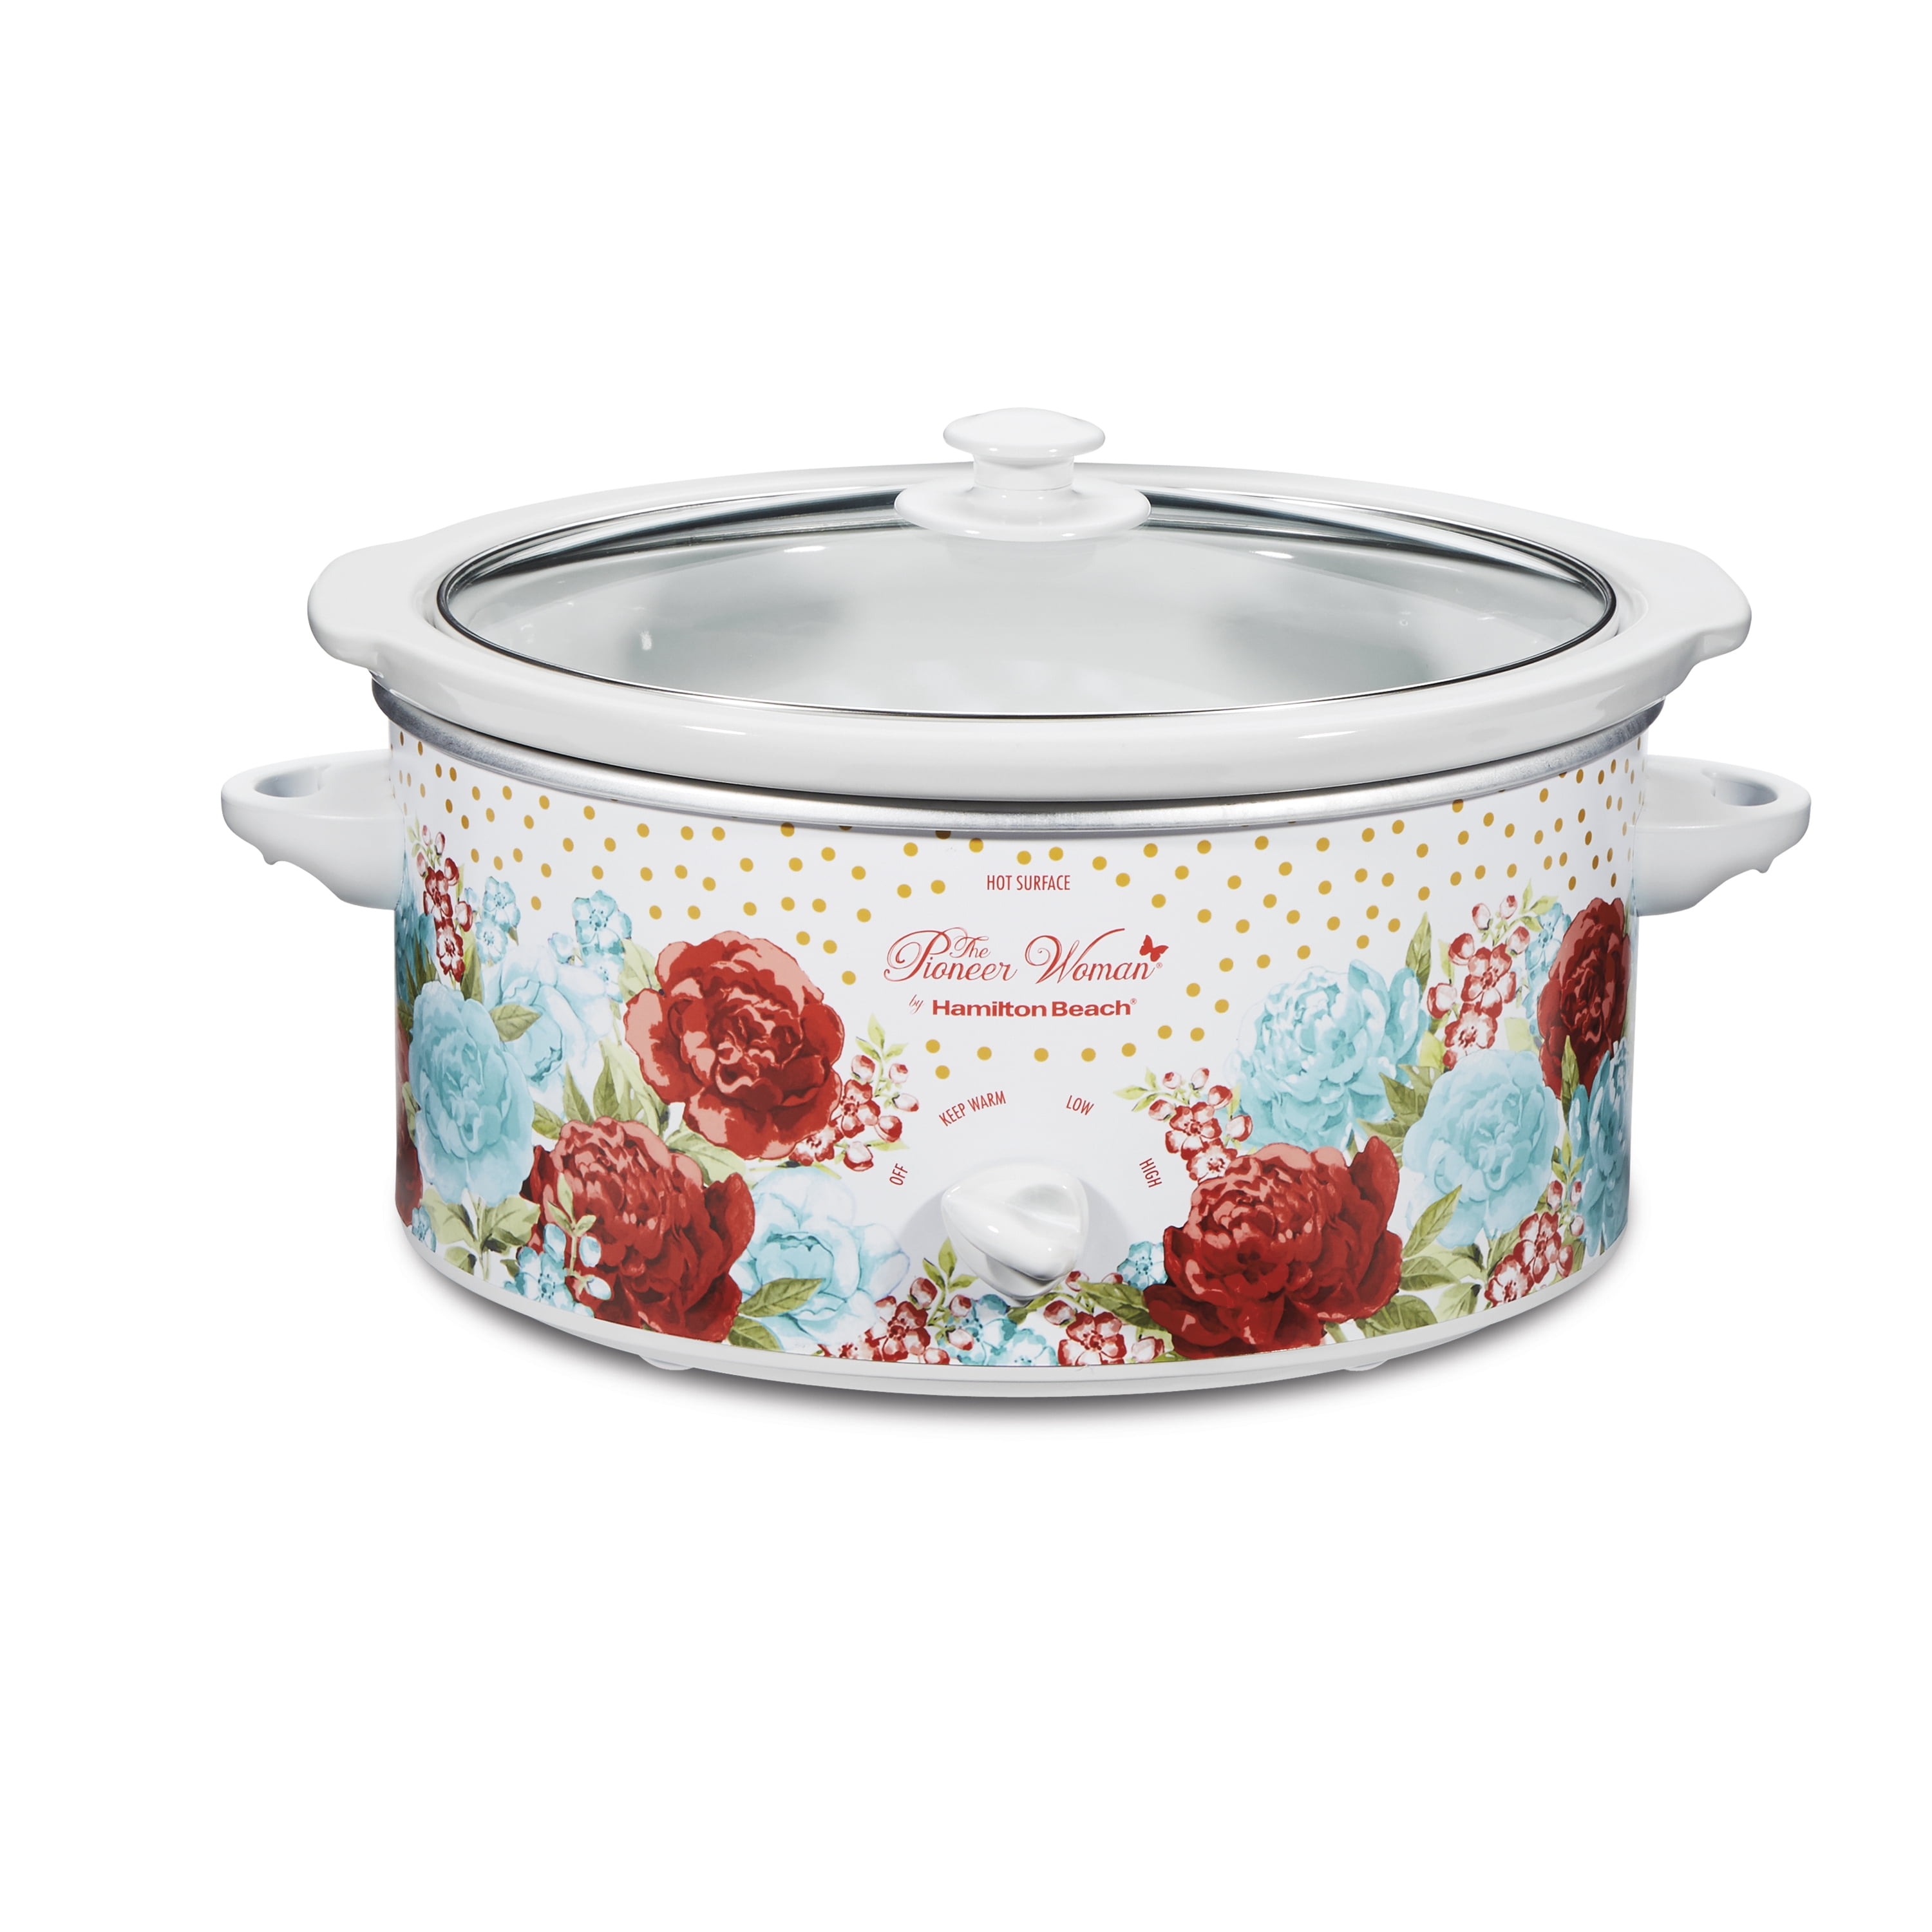 Pioneer Woman 1.5-Quart Slow Cooker 2 Pack ONLY $9.96